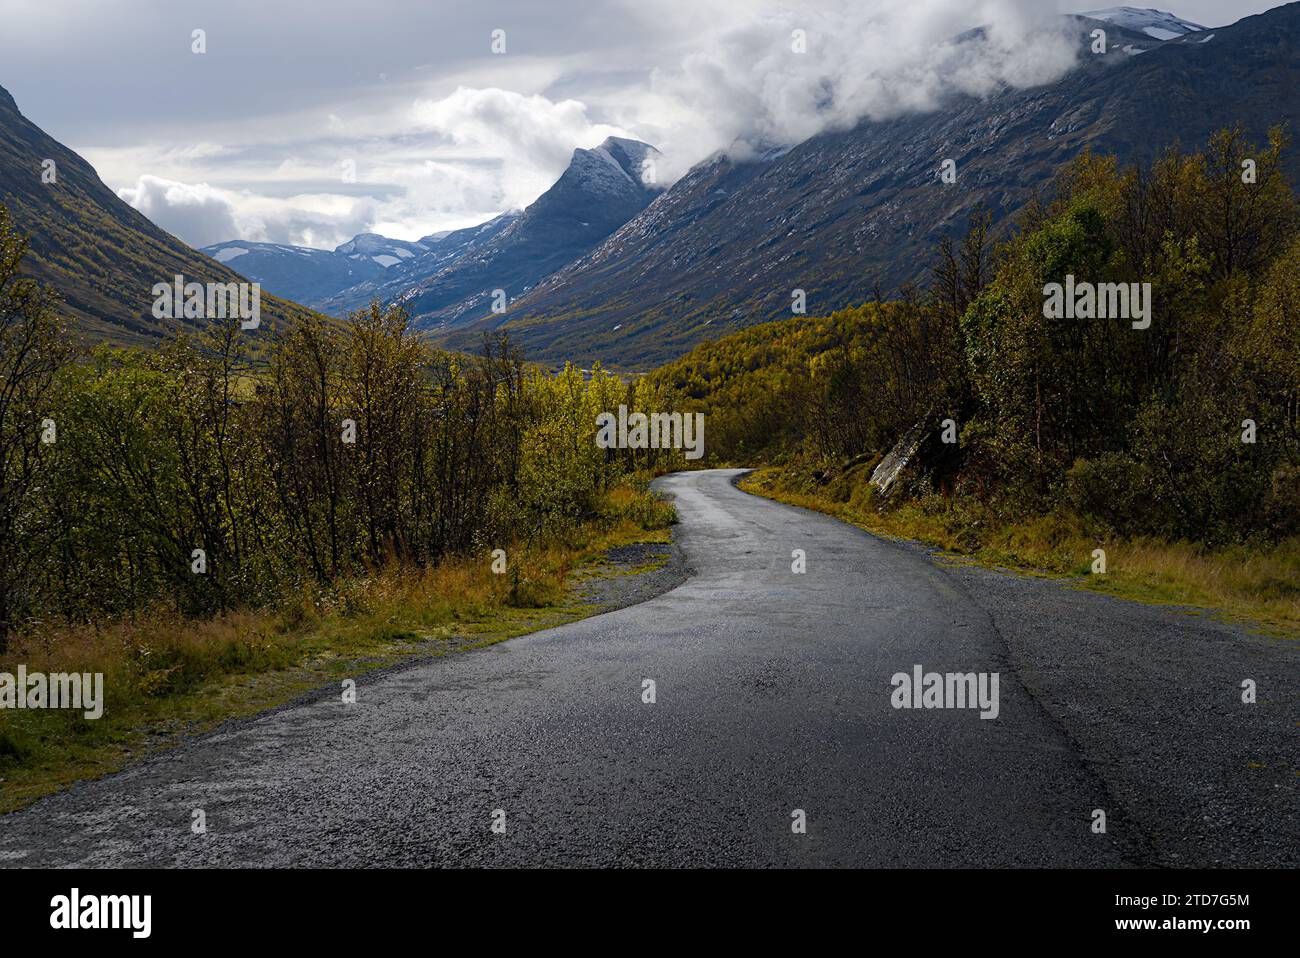 A paved road leads to Skagsnebb Mountain under cloudy sky. Stock Photo